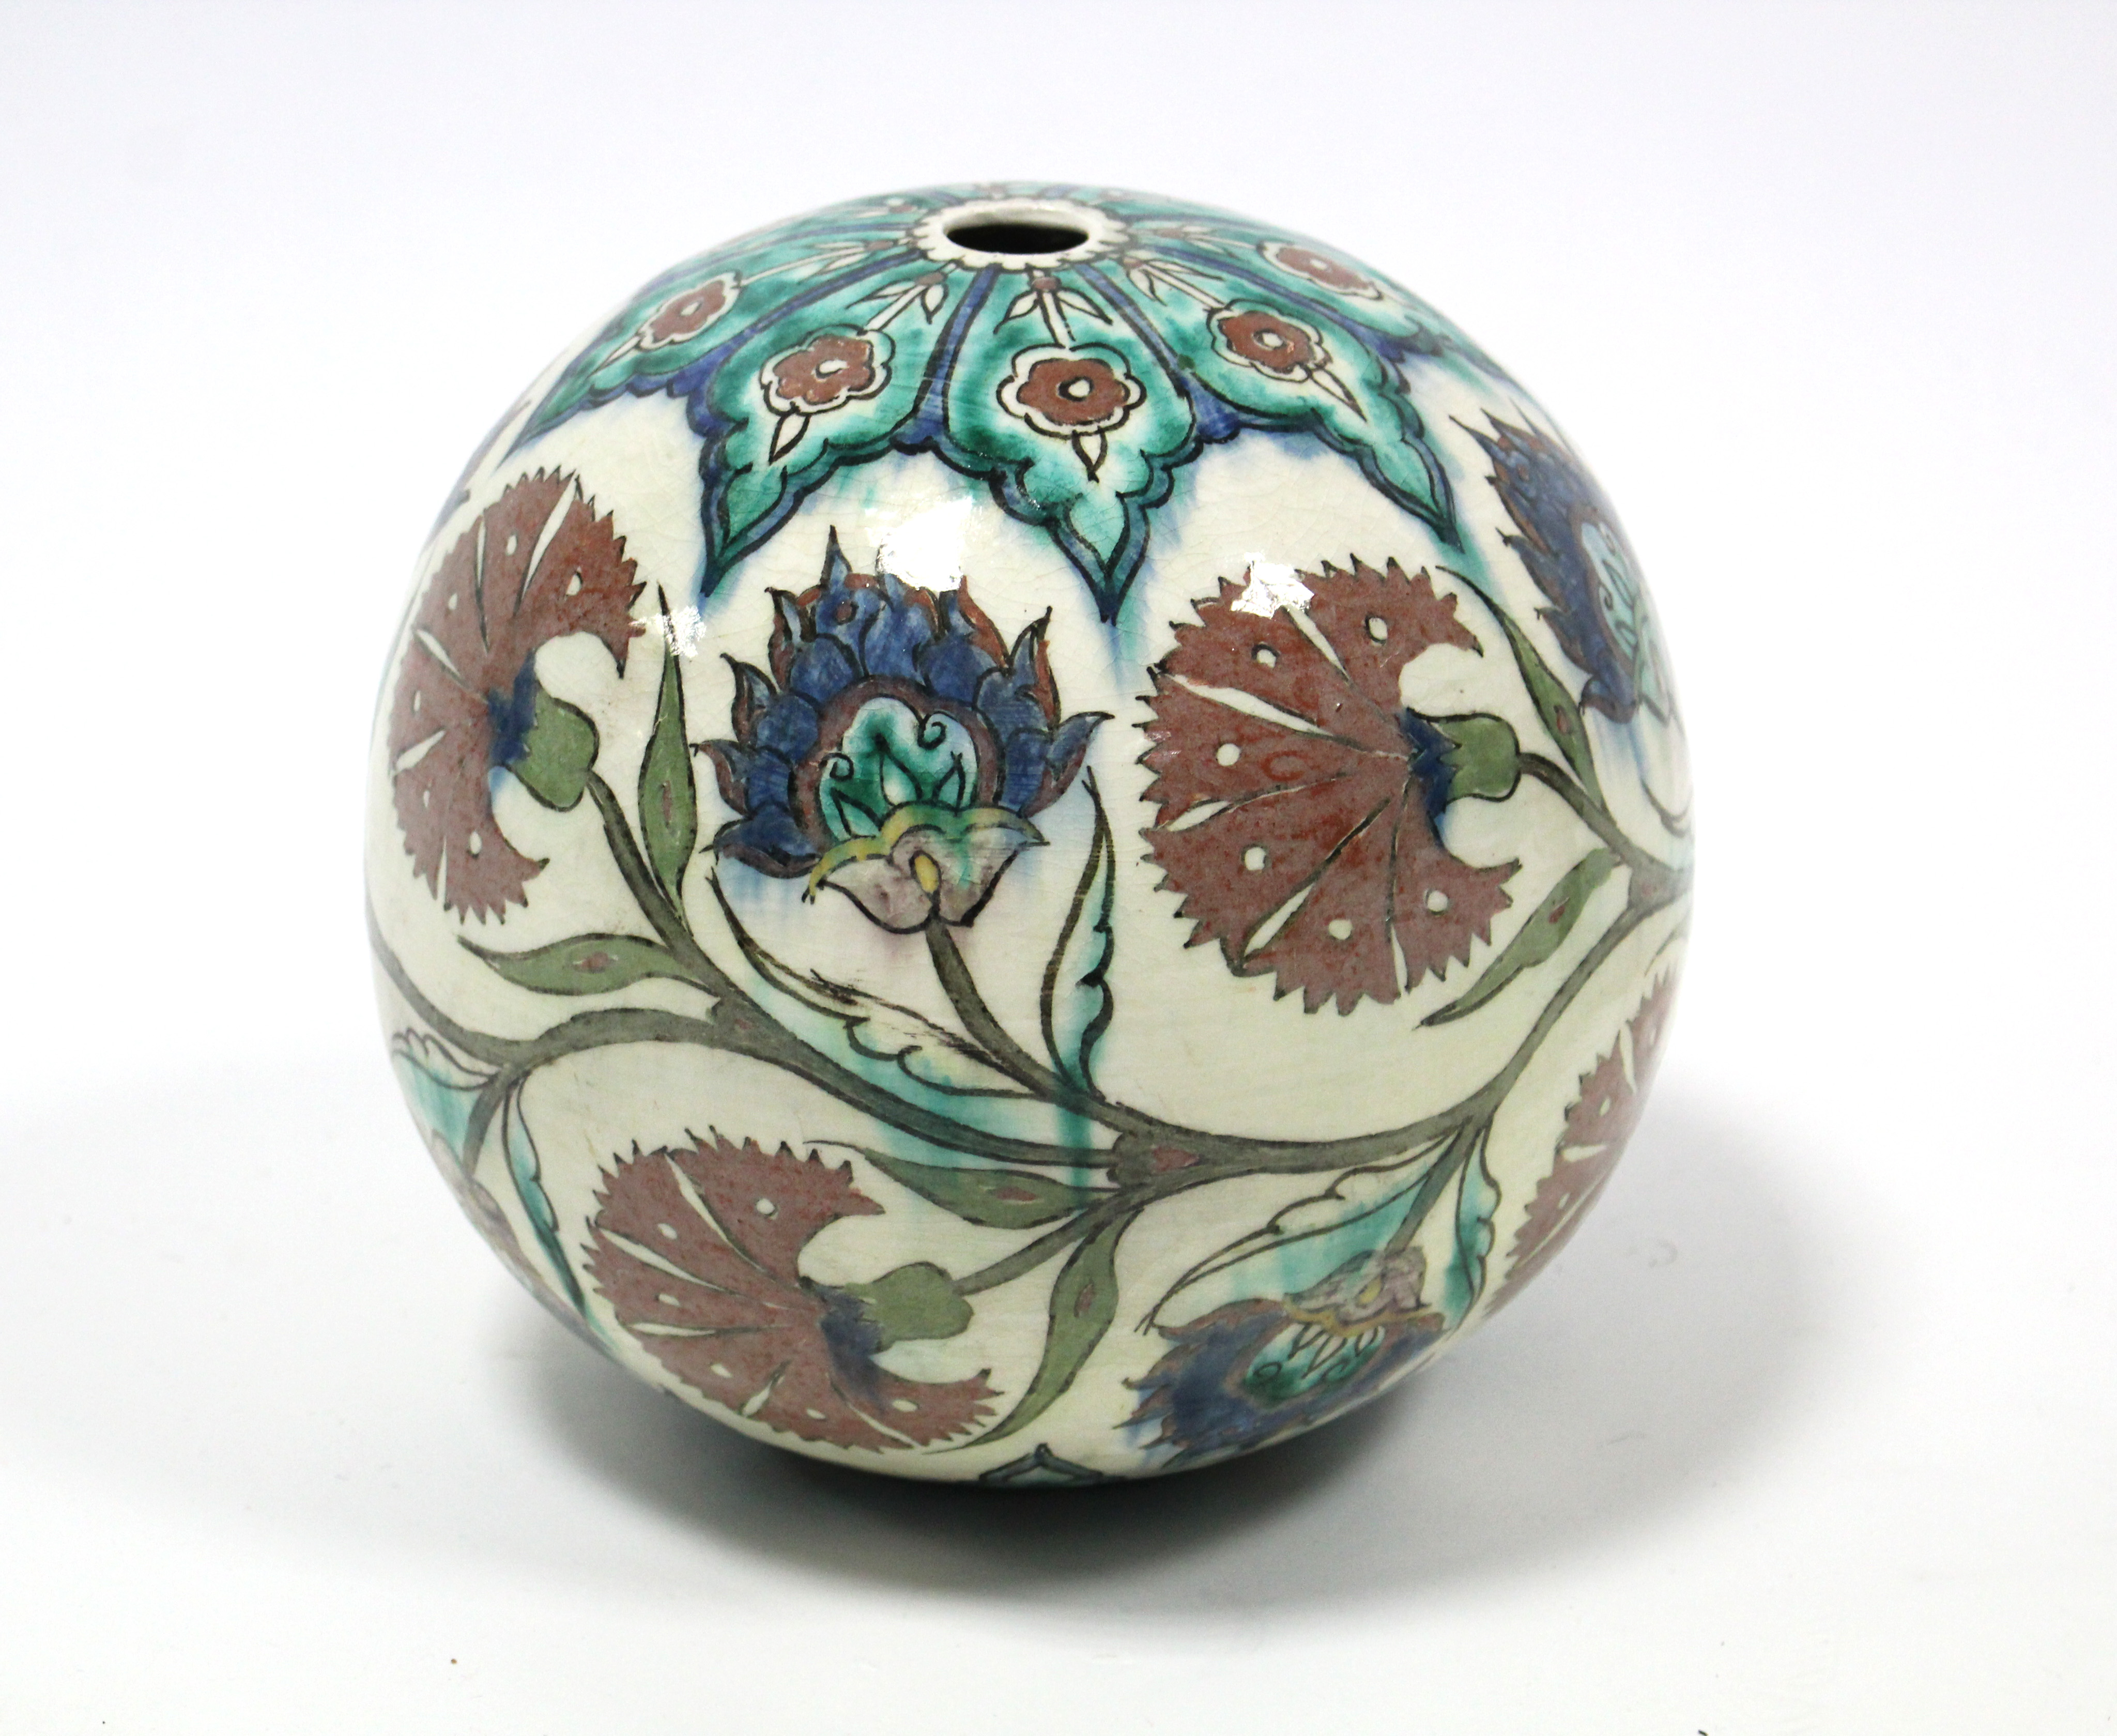 An Iznik-style pottery spherical pendant with painted floral decoration on a cream ground; 8” diam.